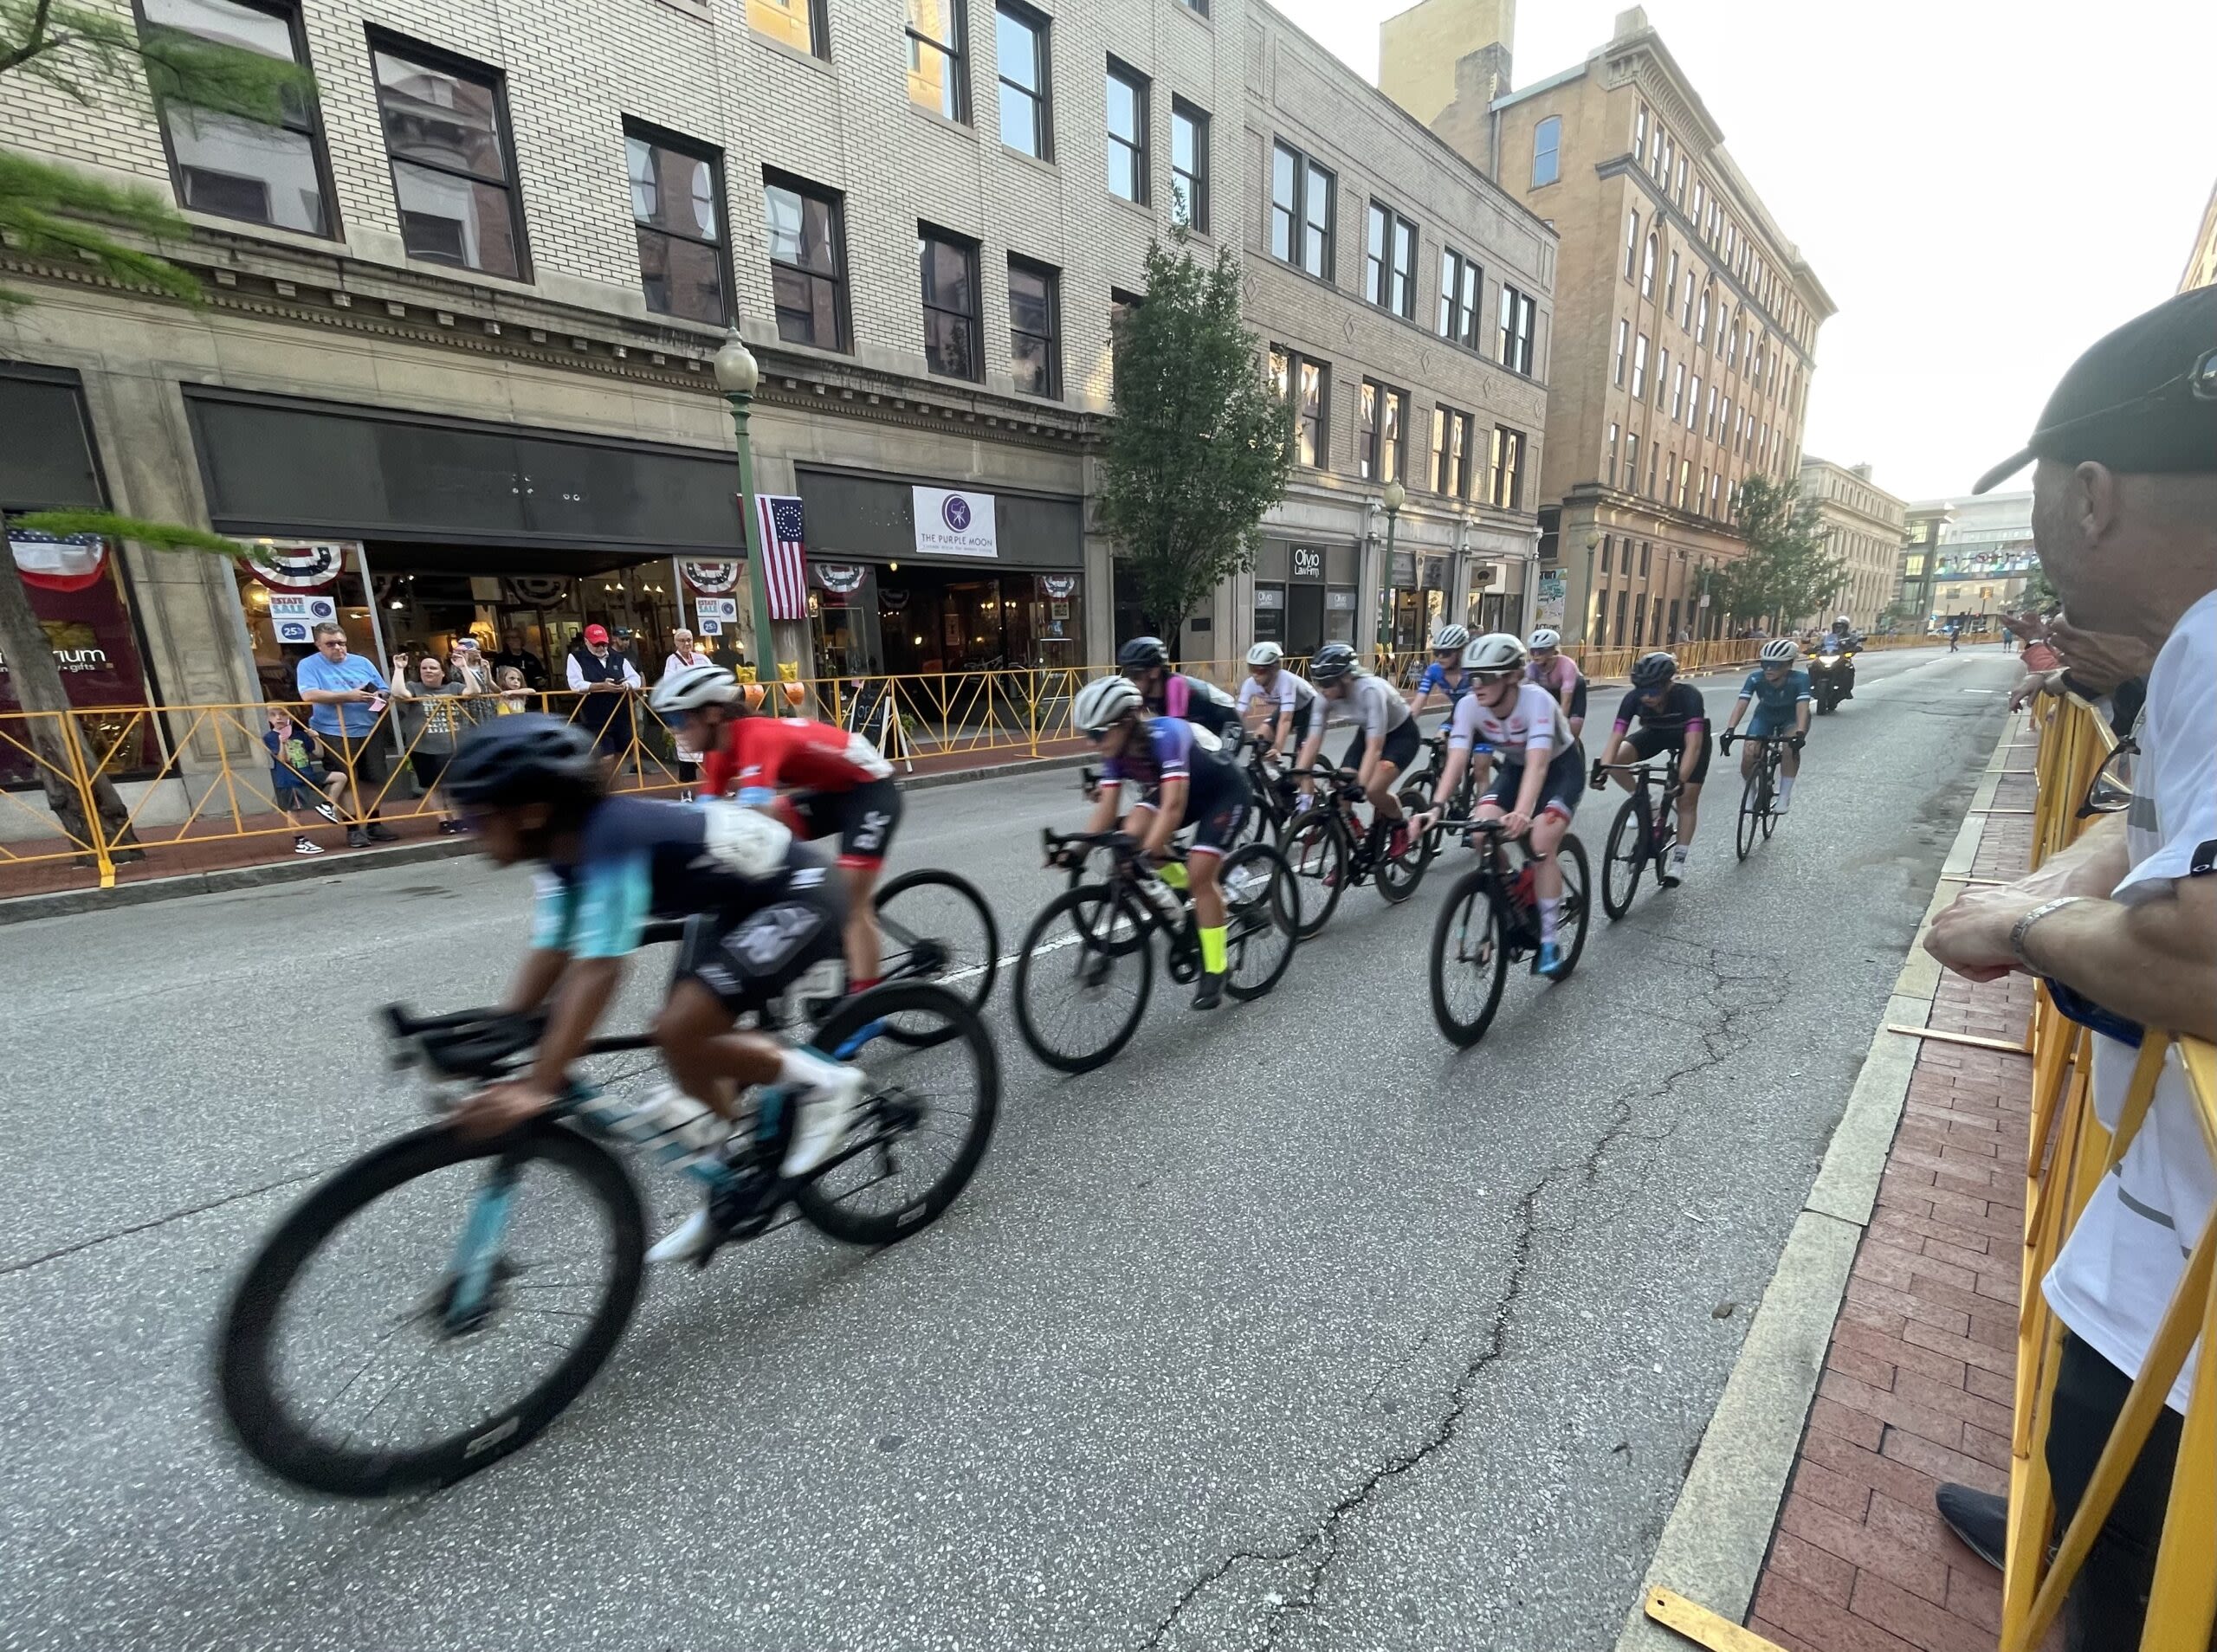 Crit racing excites fans on Charleston's downtown streets - WV MetroNews